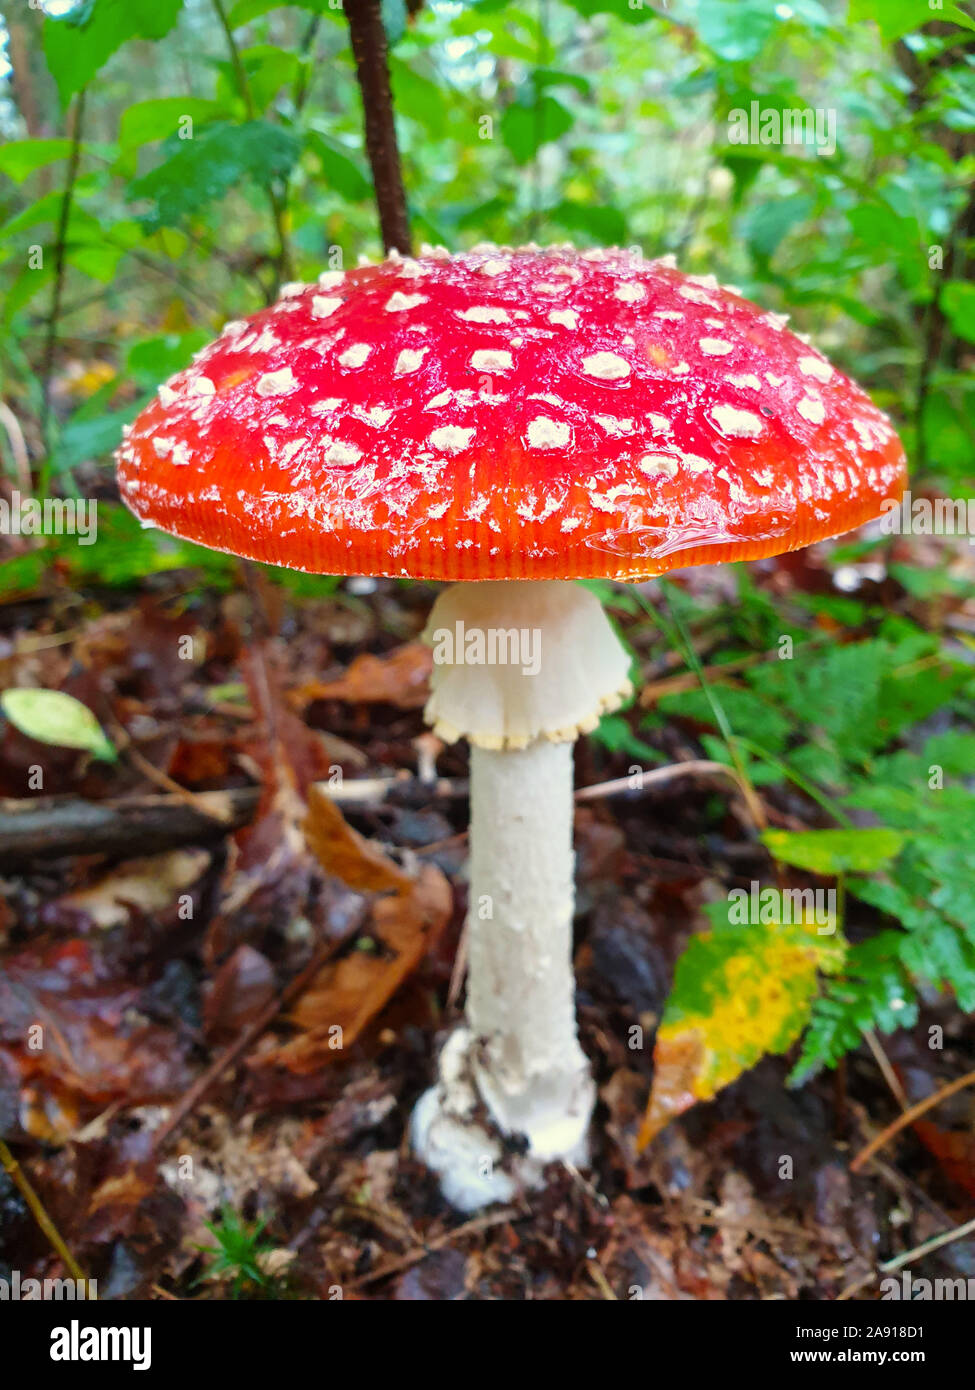 Amanita muscaria mushroom in a green forest Stock Photo